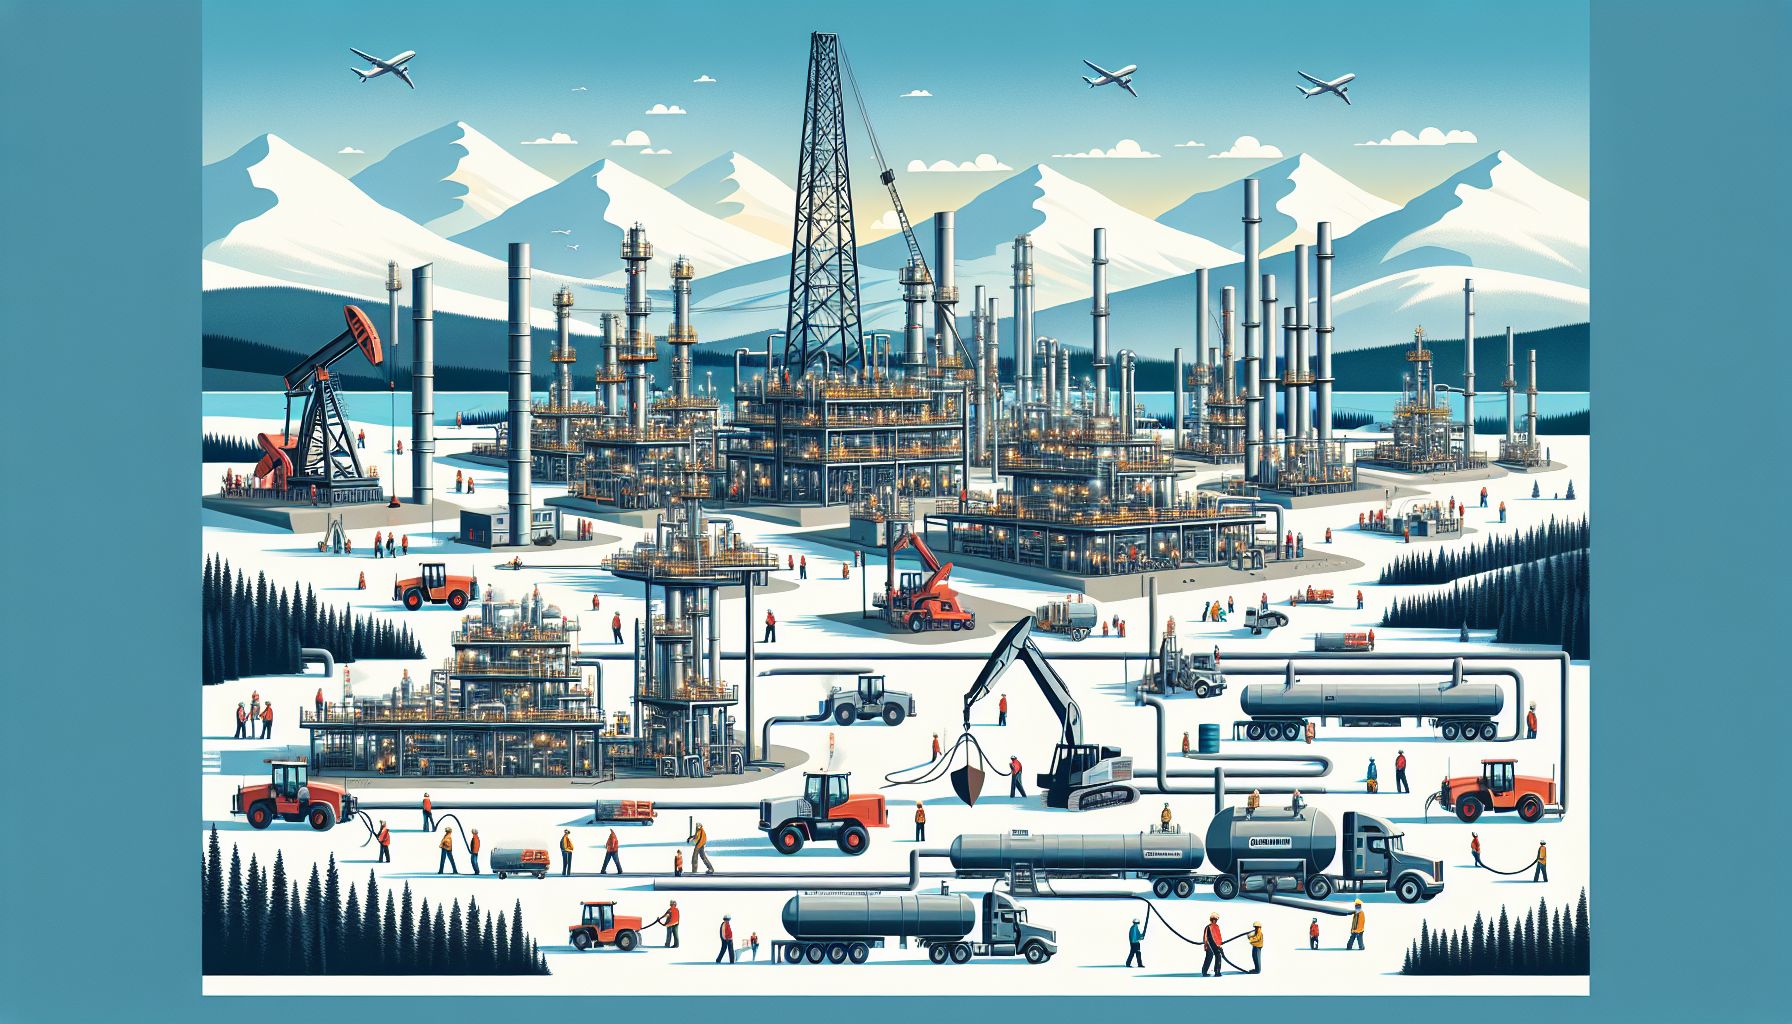 ilknitzwqm - The Fascinating World of Canada's Oil & Gas Industry